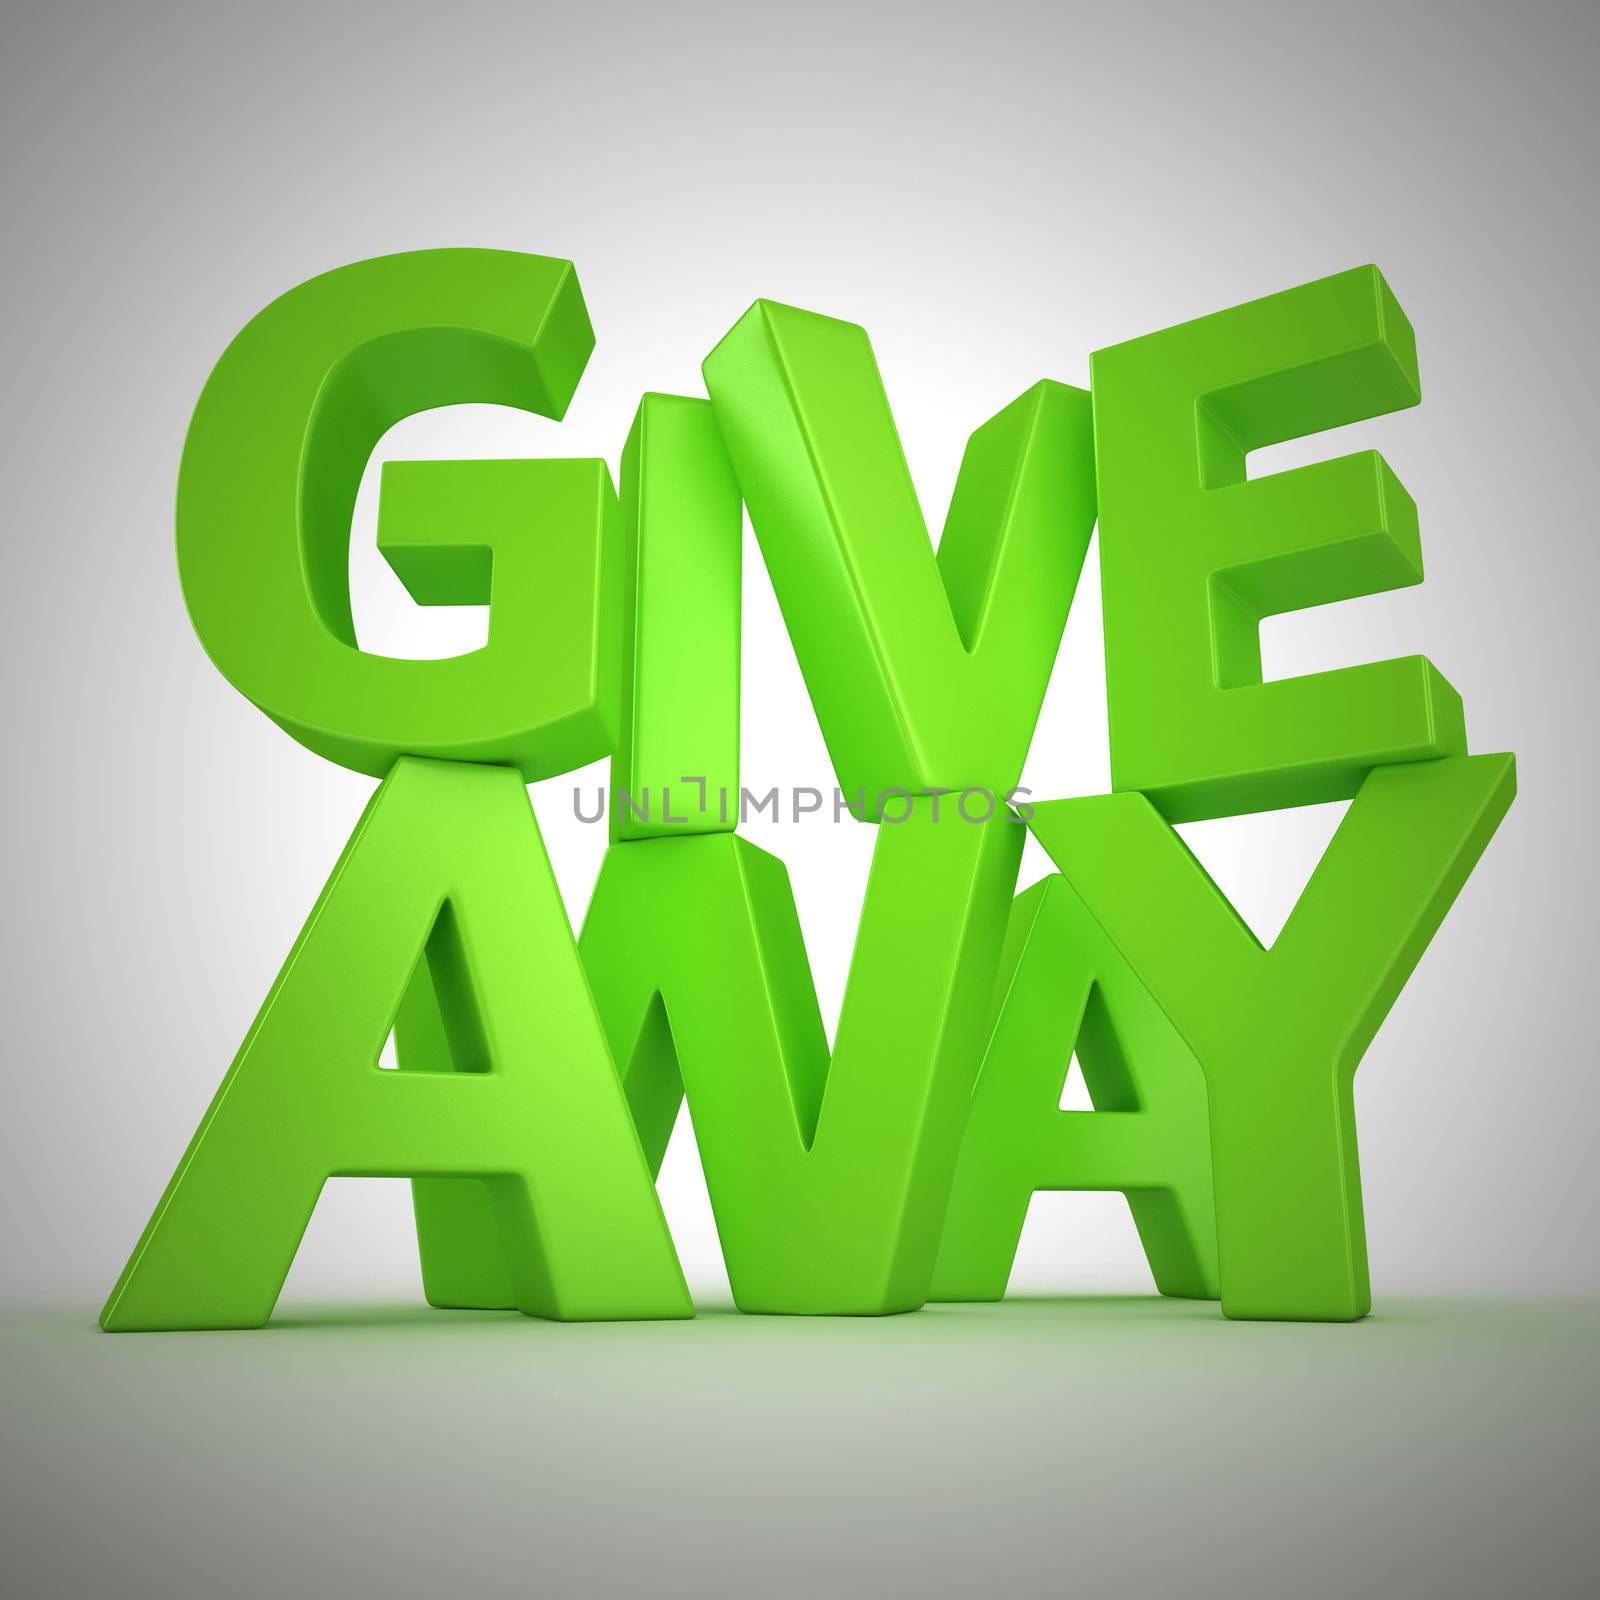 Text "Giveaway" made from green letters